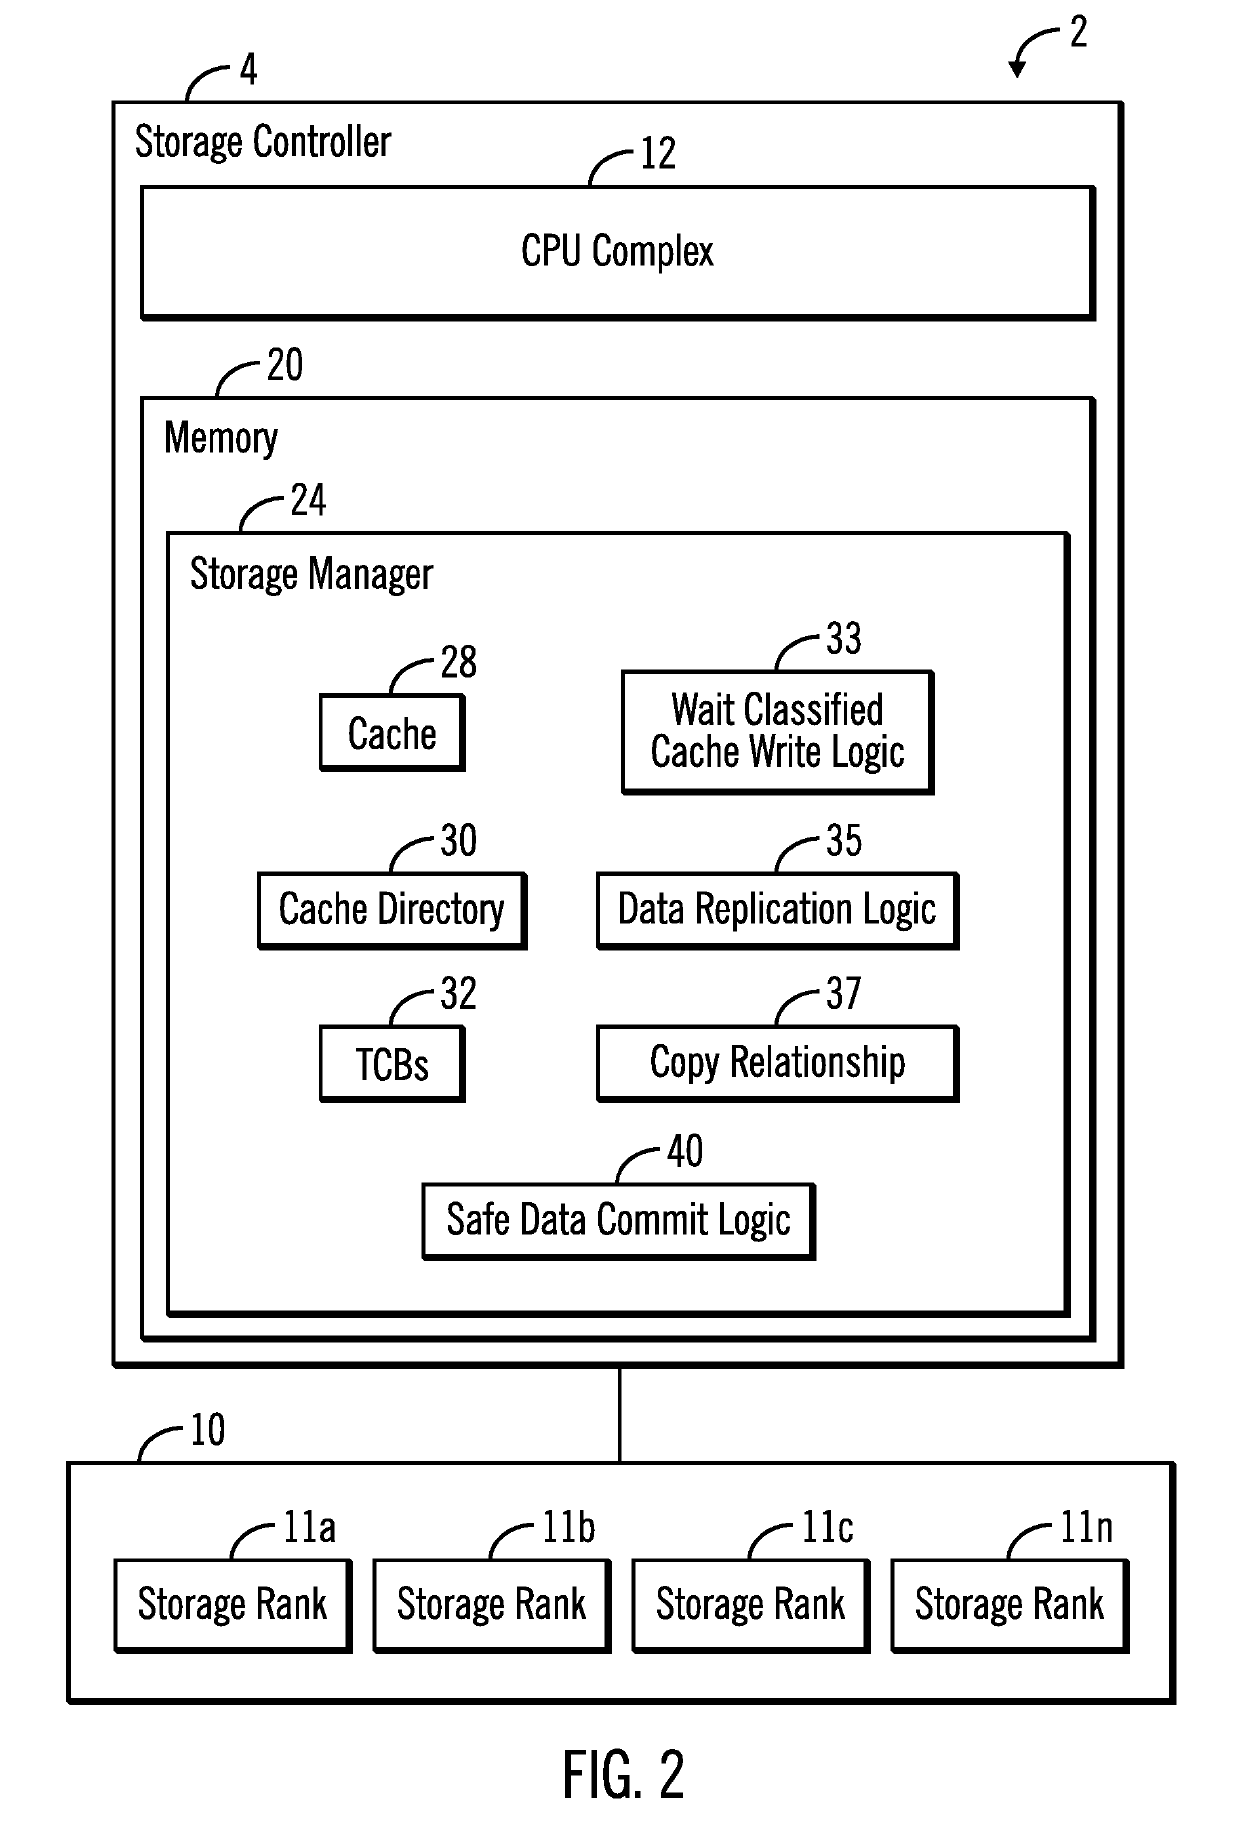 Wait classified cache writes in a data storage system